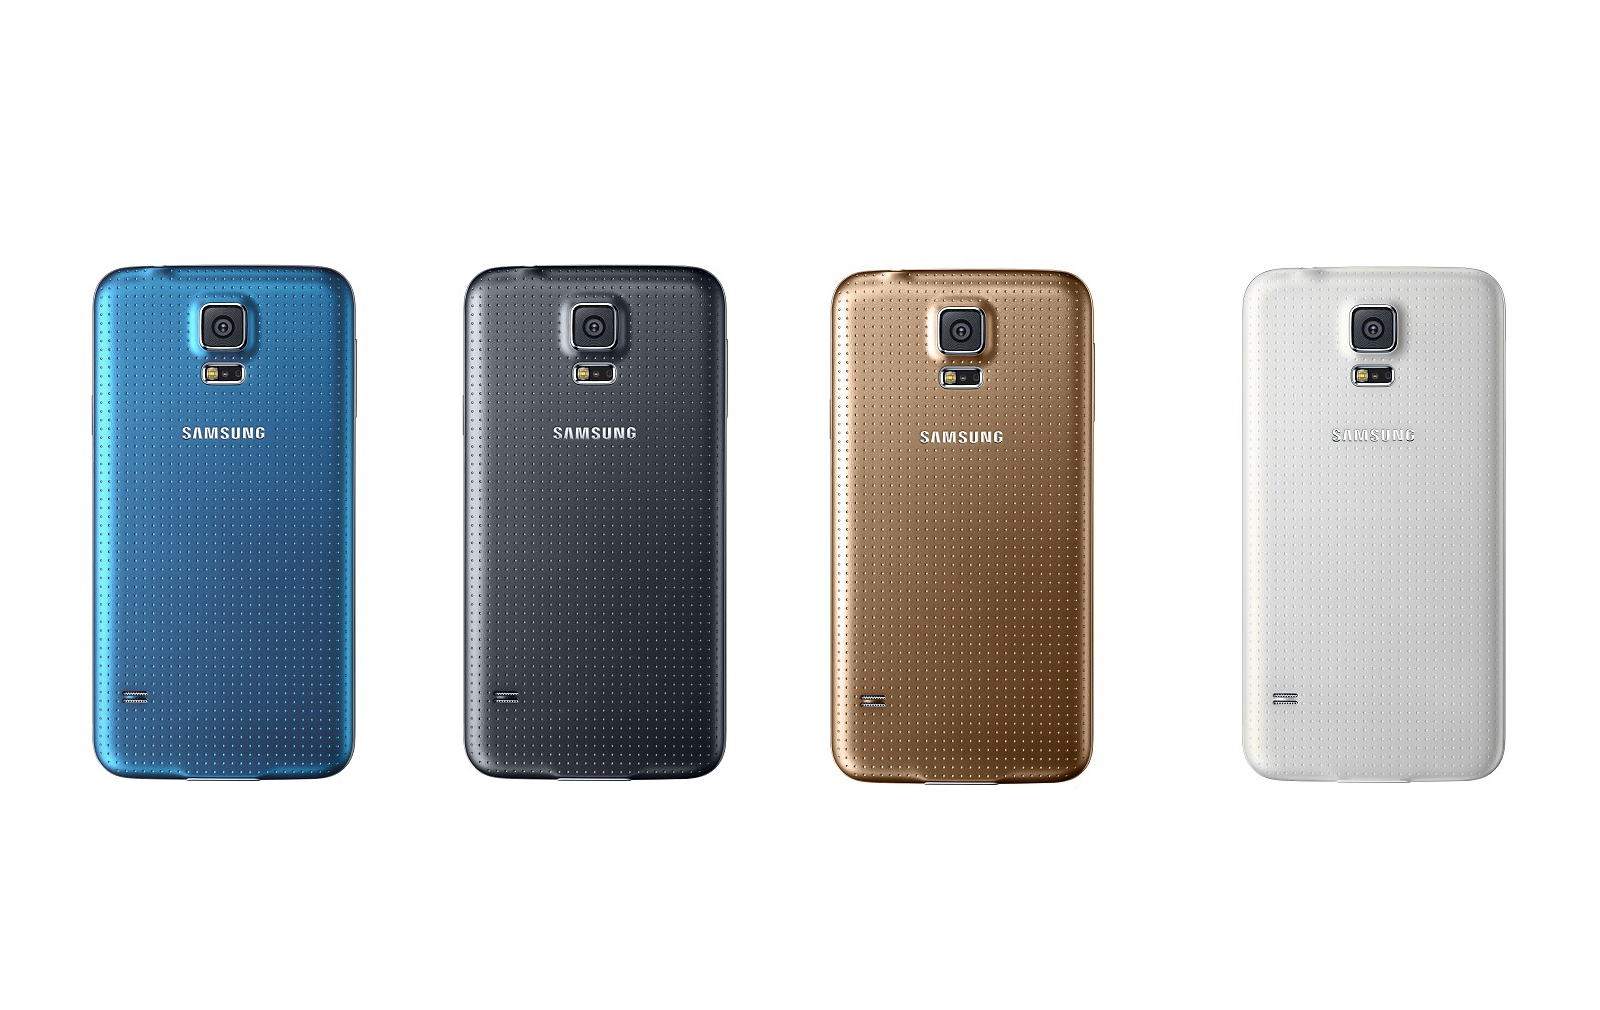 Samsung-S5-smartphone-chassis